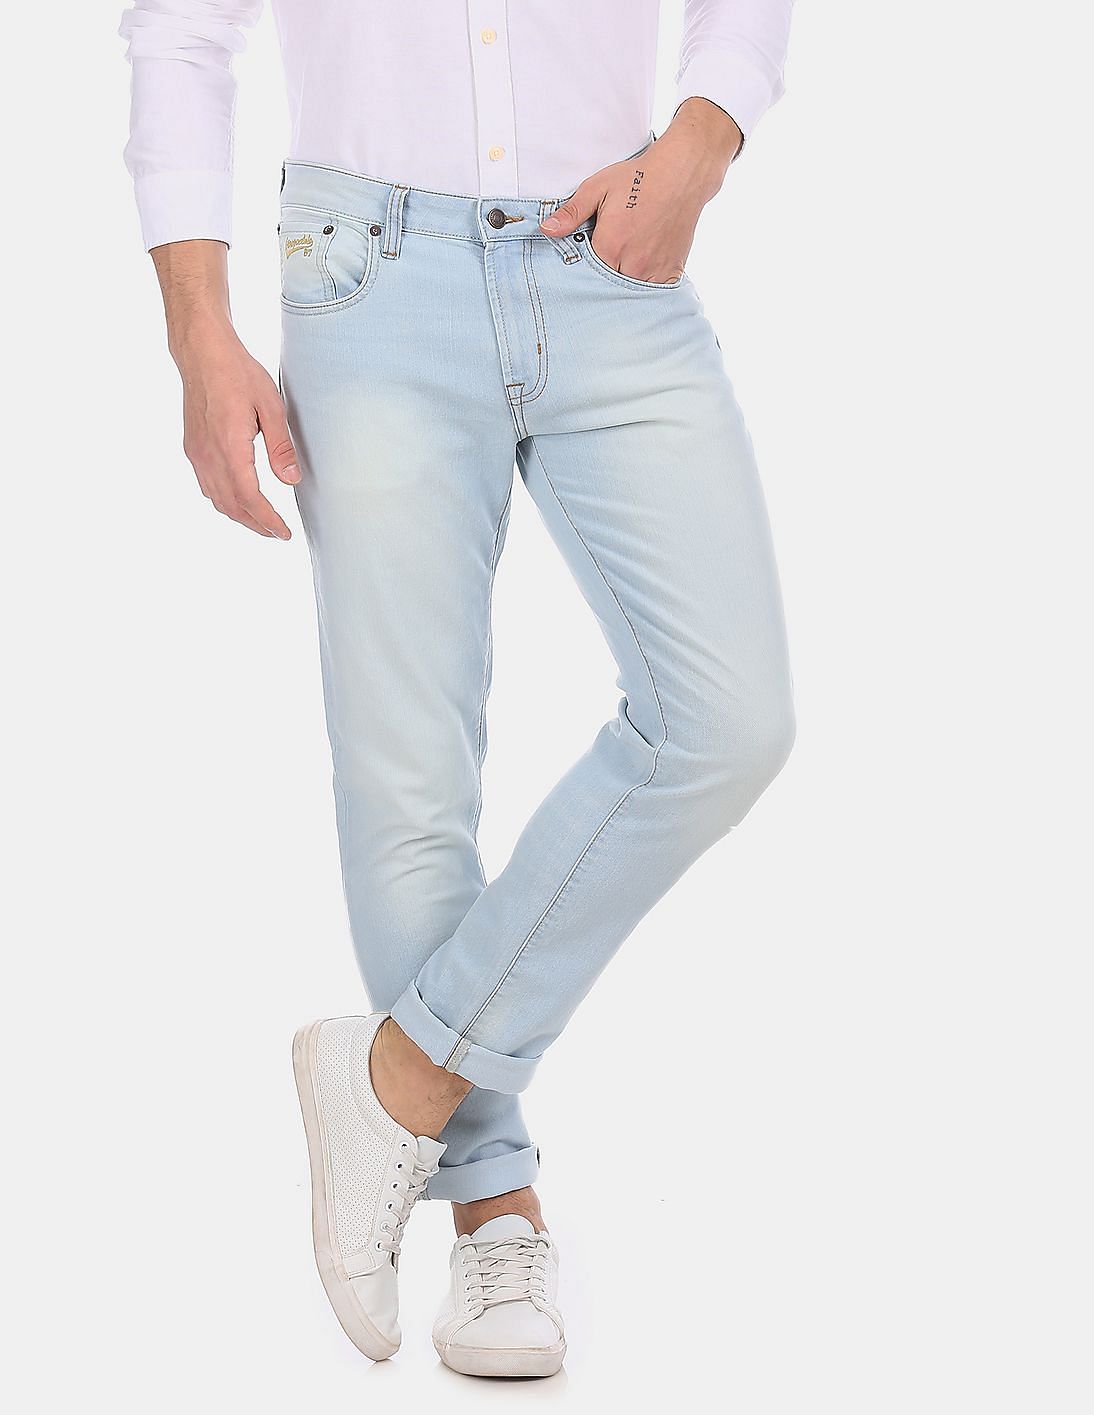 stone washed jeans mens